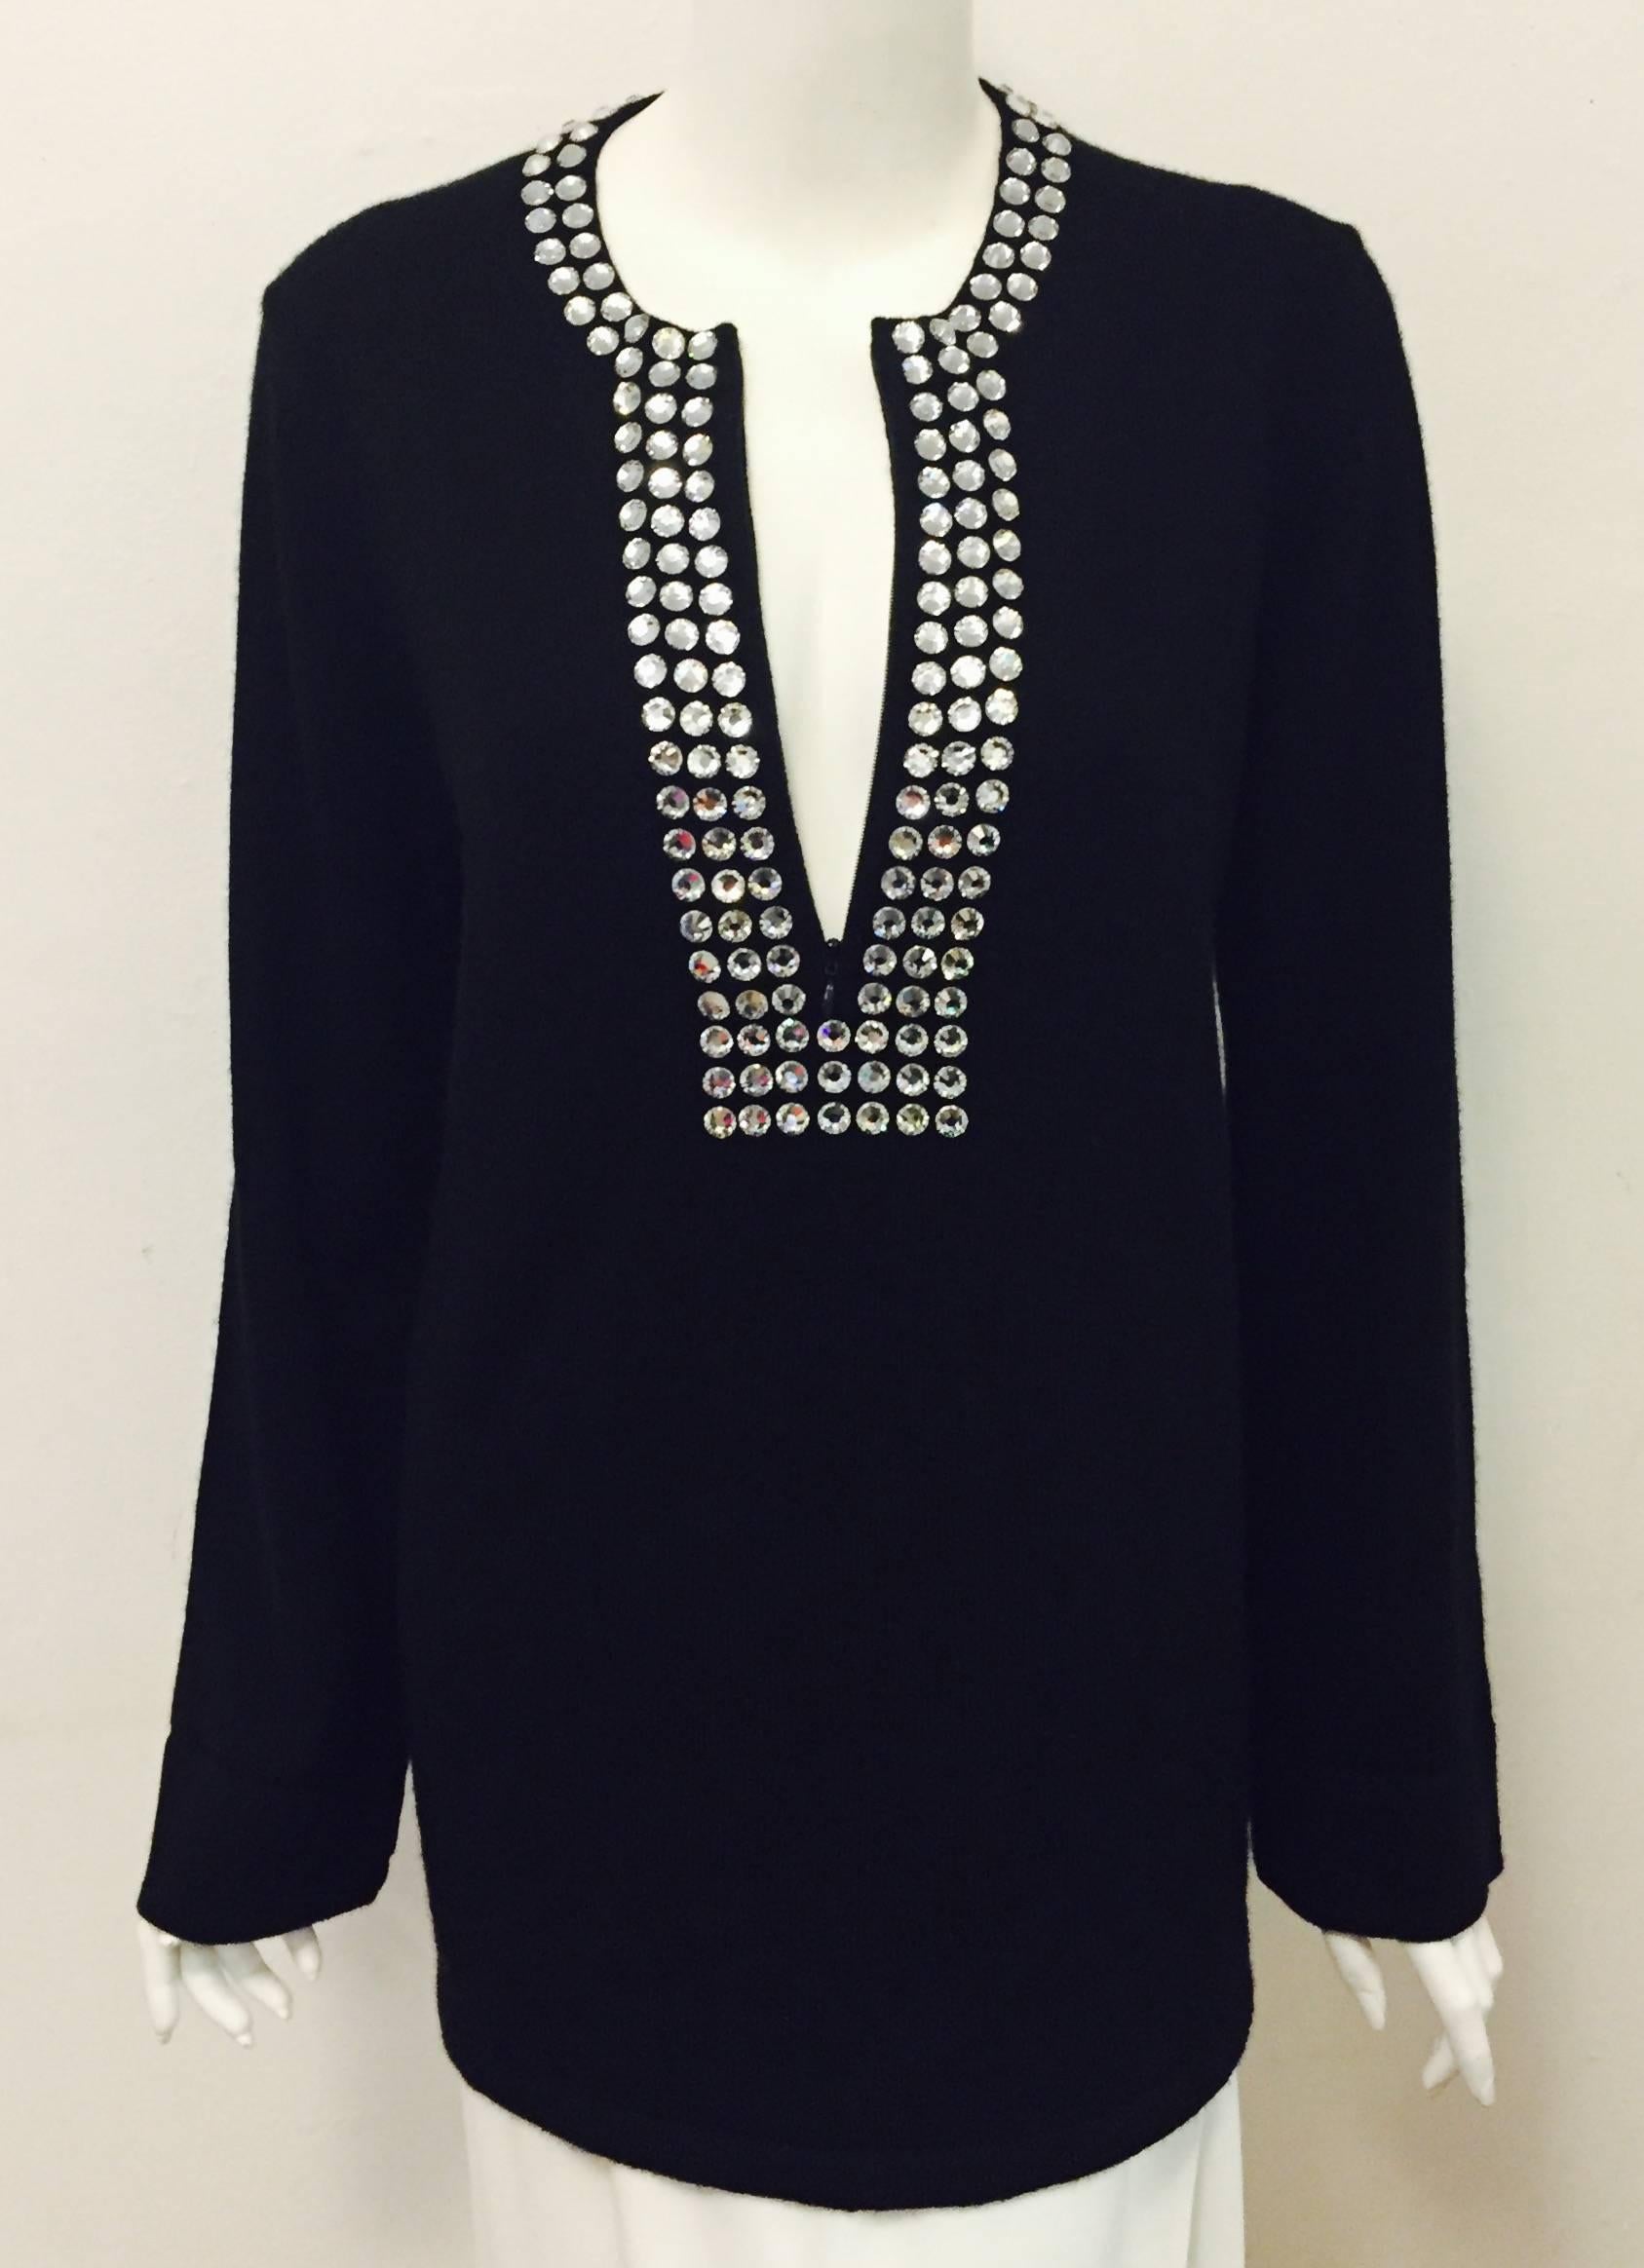 Marvelous Michael Kors Black Cashmere Sweater with Crystal Adornment on Neckline 1